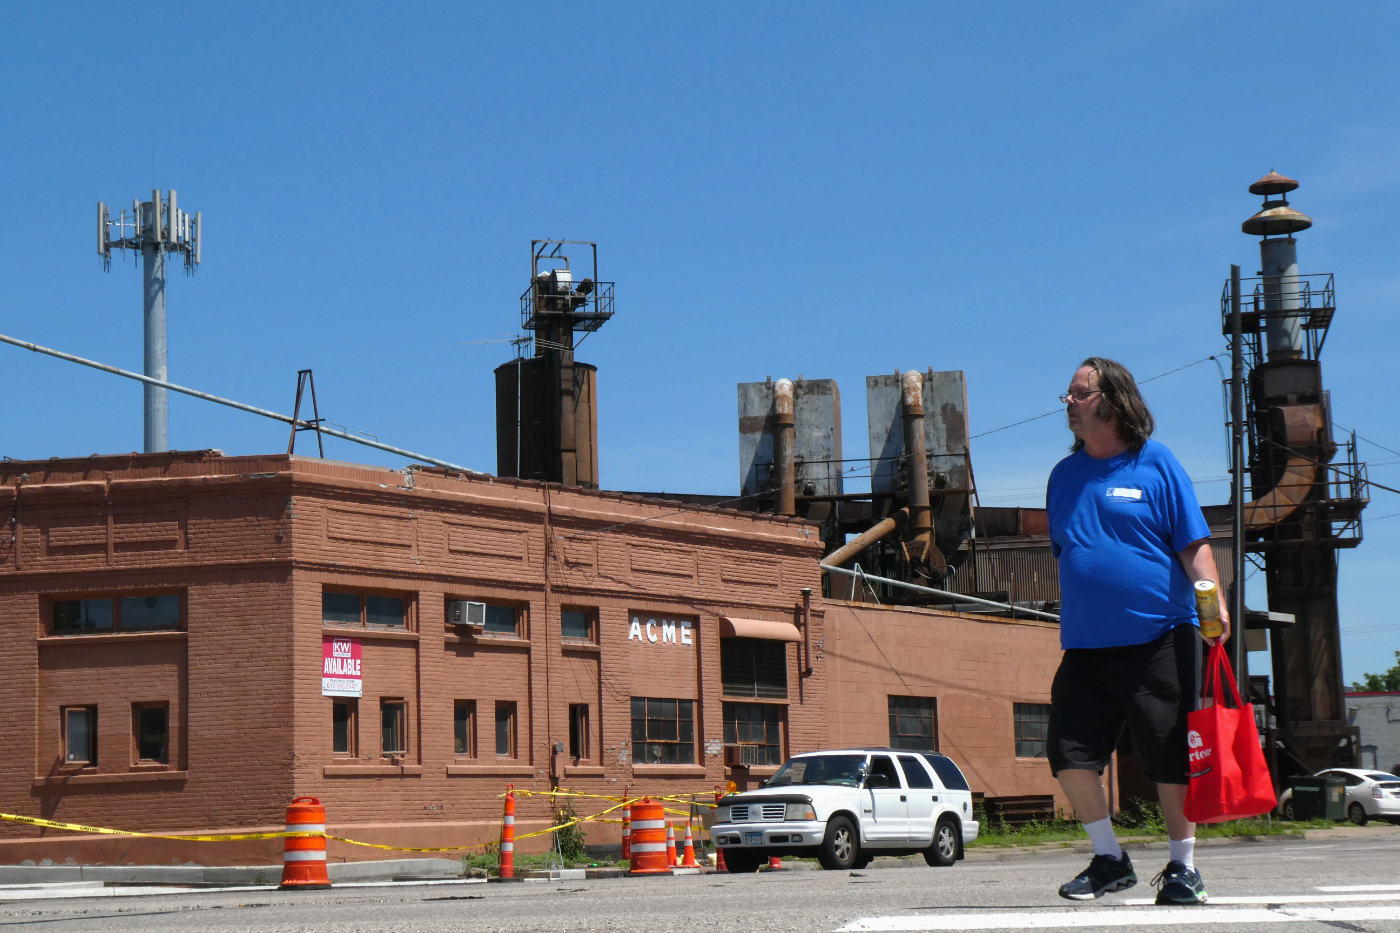 man in shorts with red shopping bag crossing street with ACME industrial building in background and bright blue sky